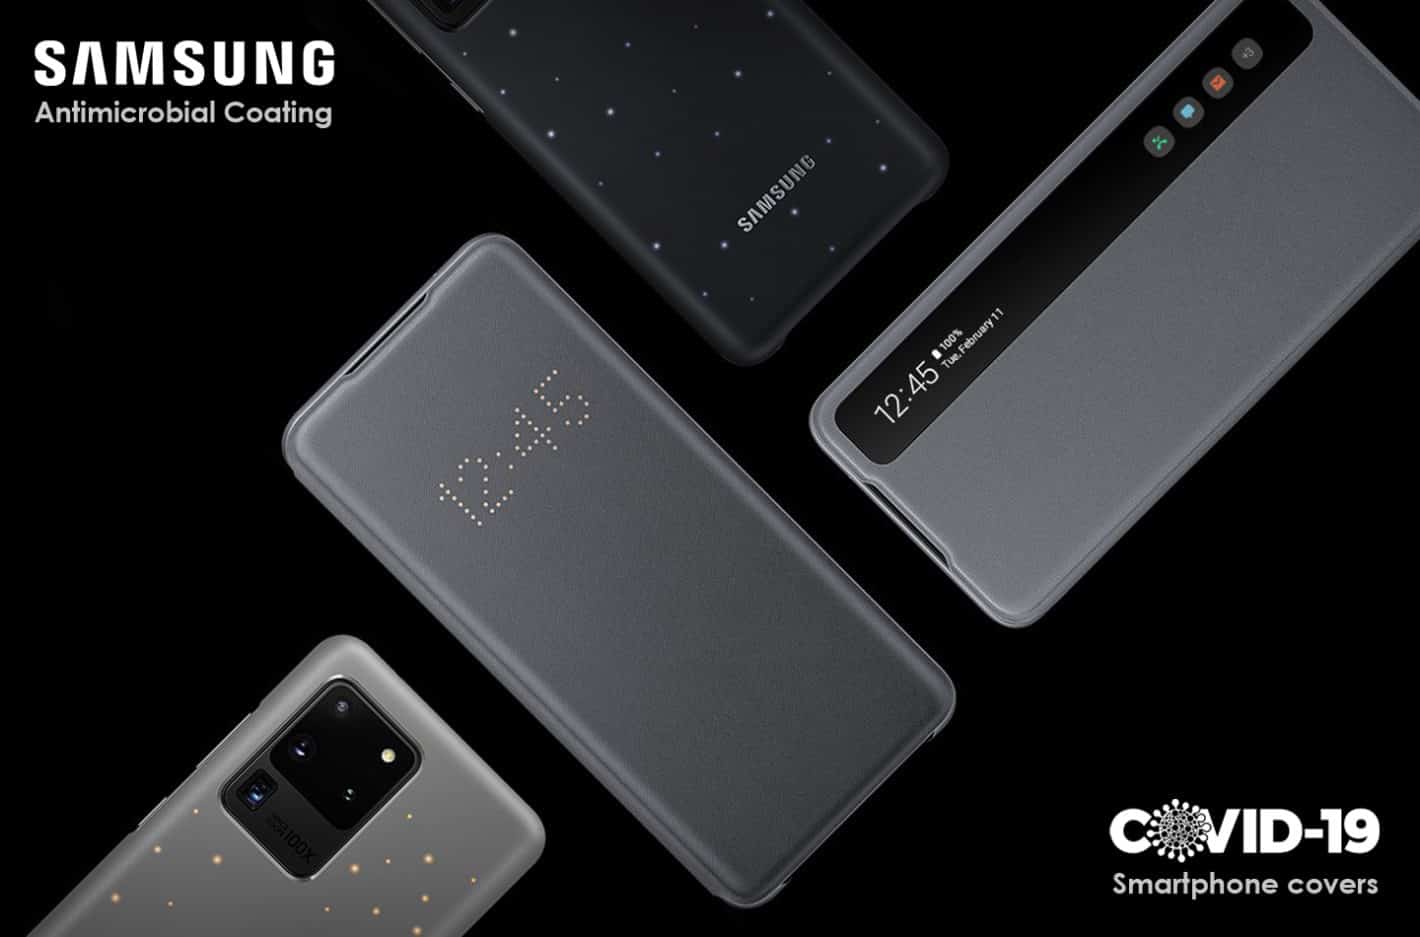 Samsung to fight Coronavirus with new Antimicrobial Smartphone Cases